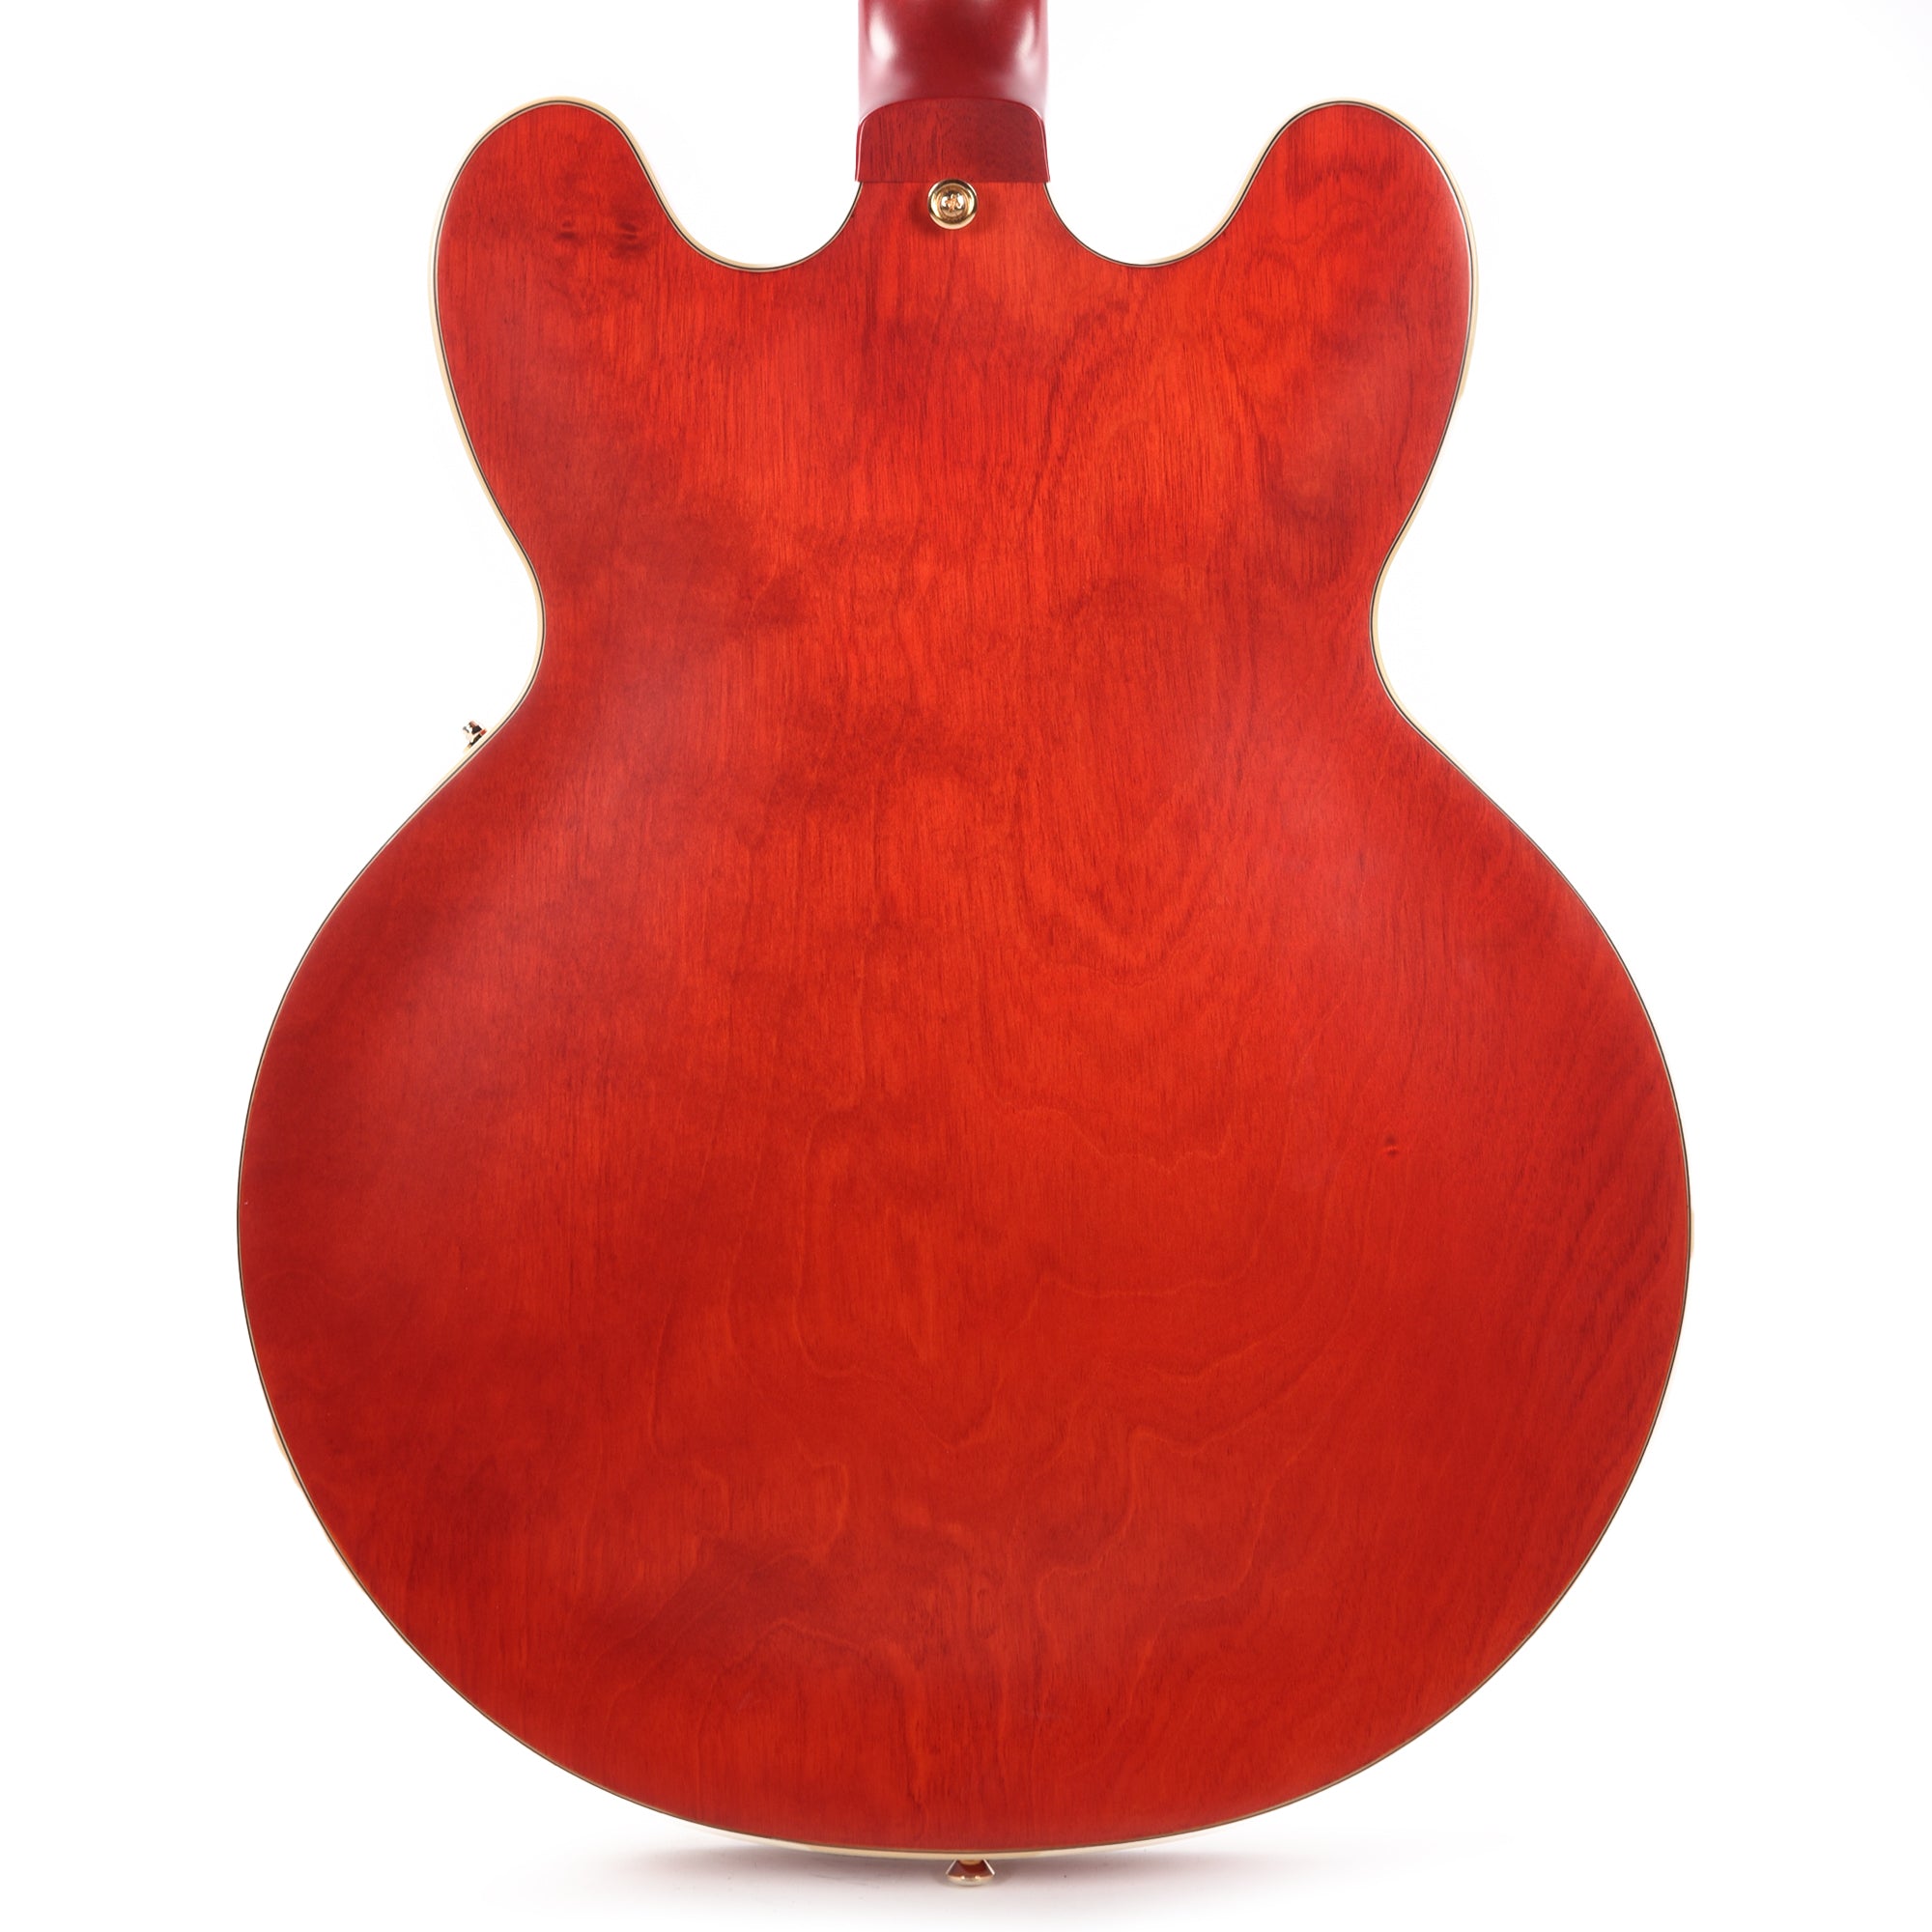 Epiphone Inspired by Gibson Custom 1959 ES-355 Cherry Red